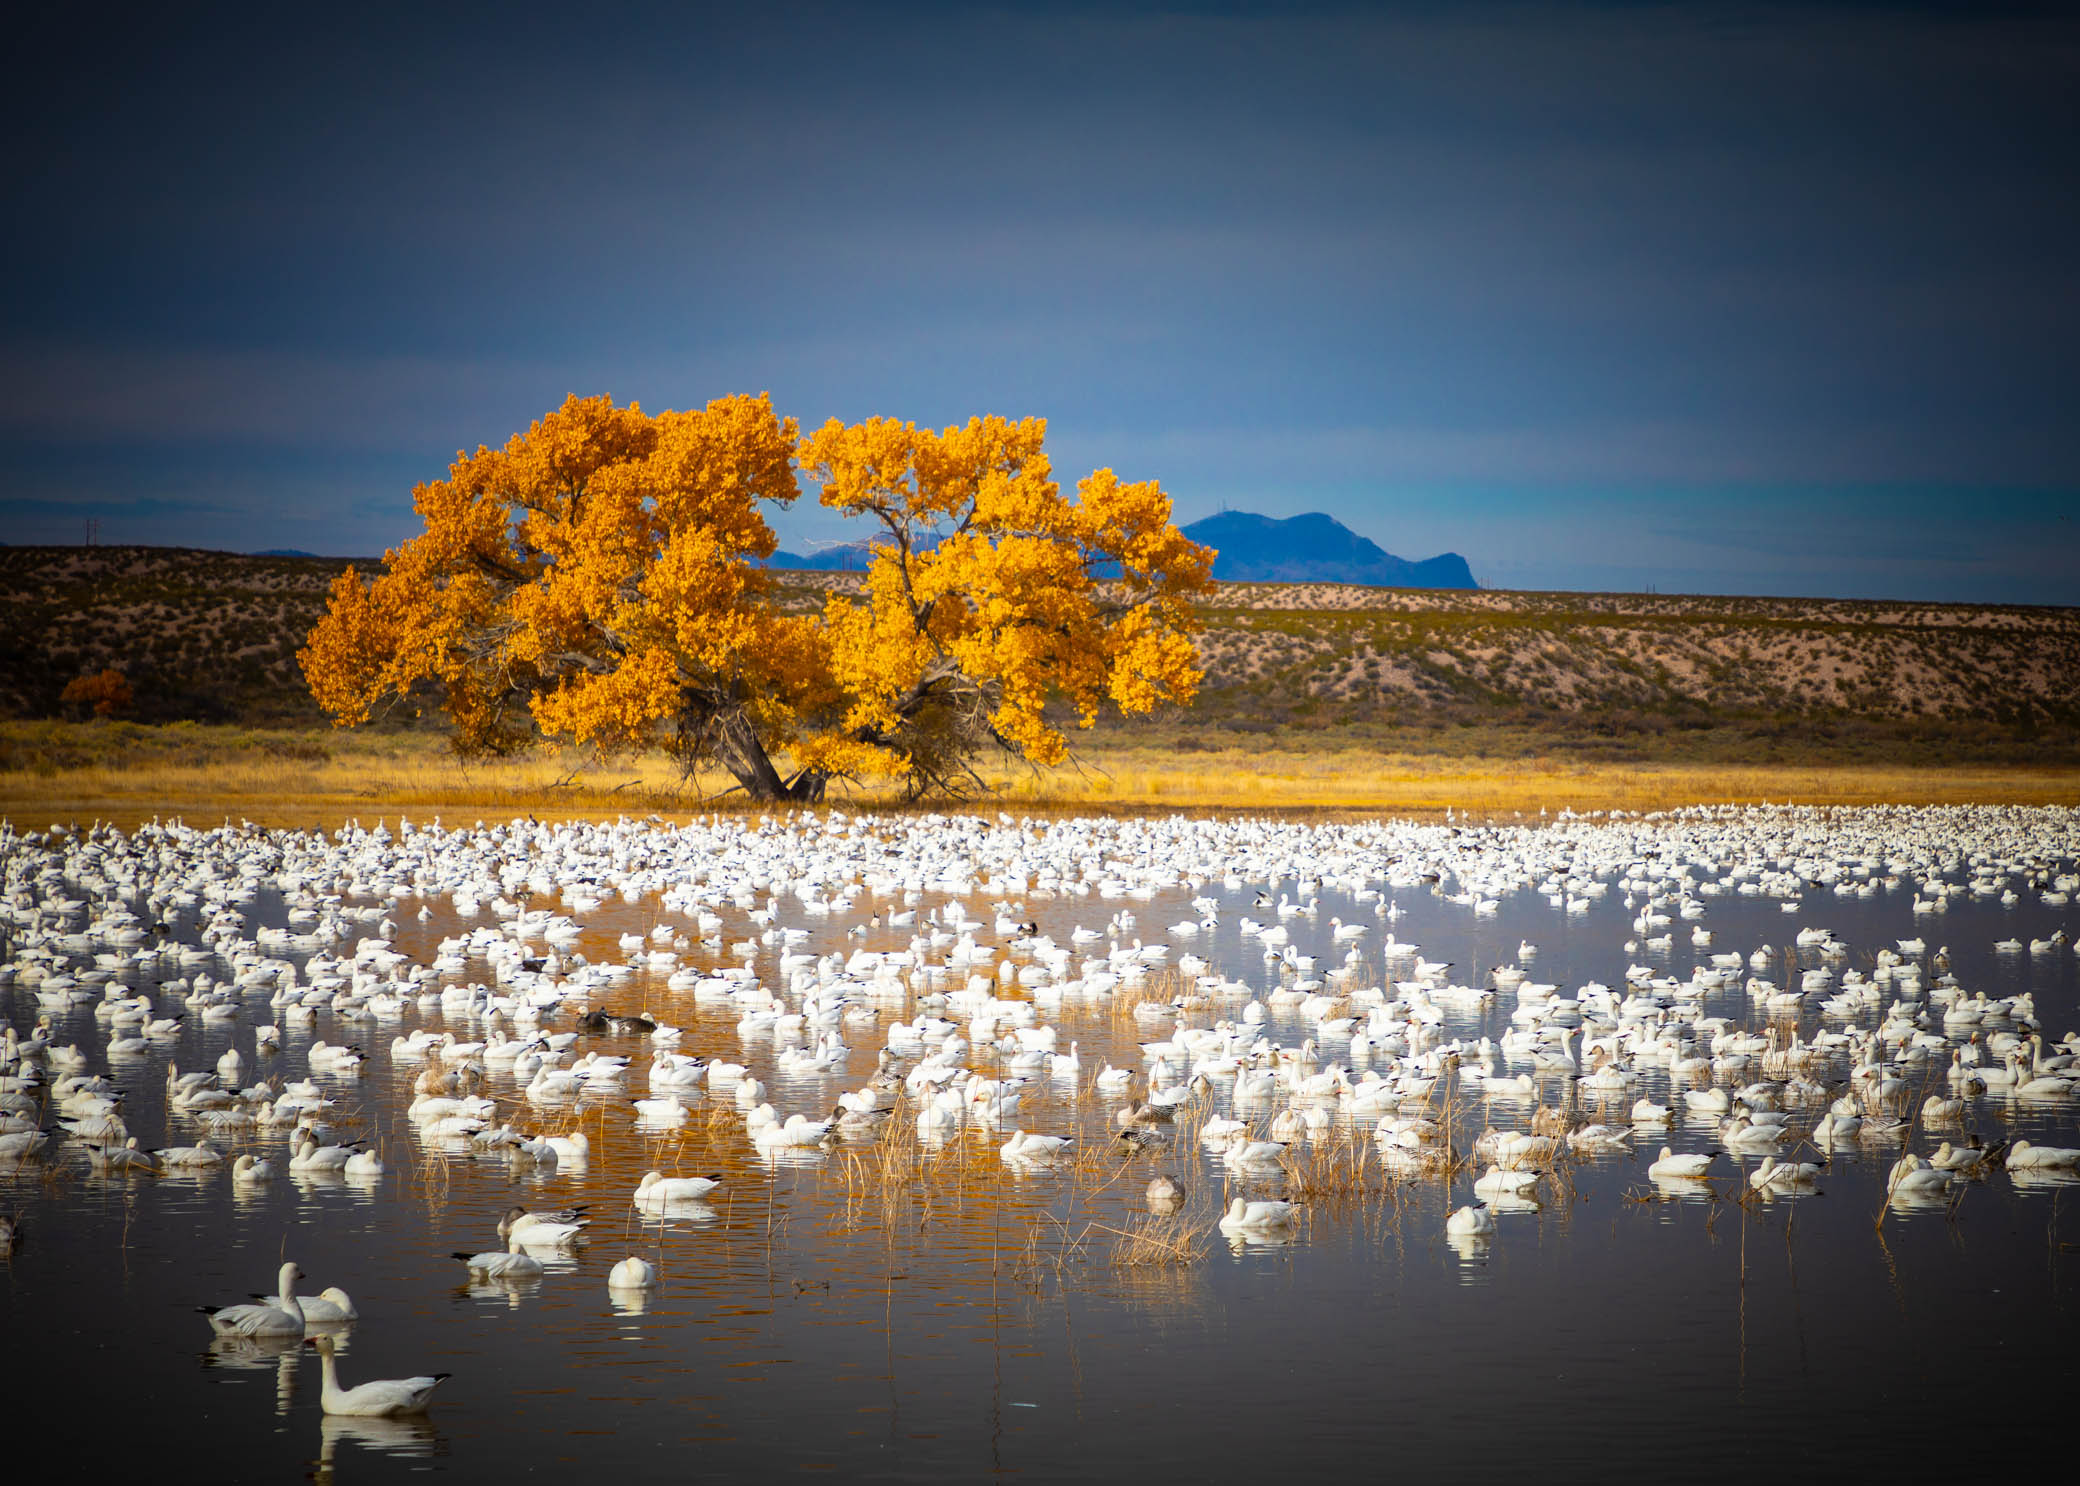 Bosque pond, snow geese, cottonwood in fall colors, November 16, 2019